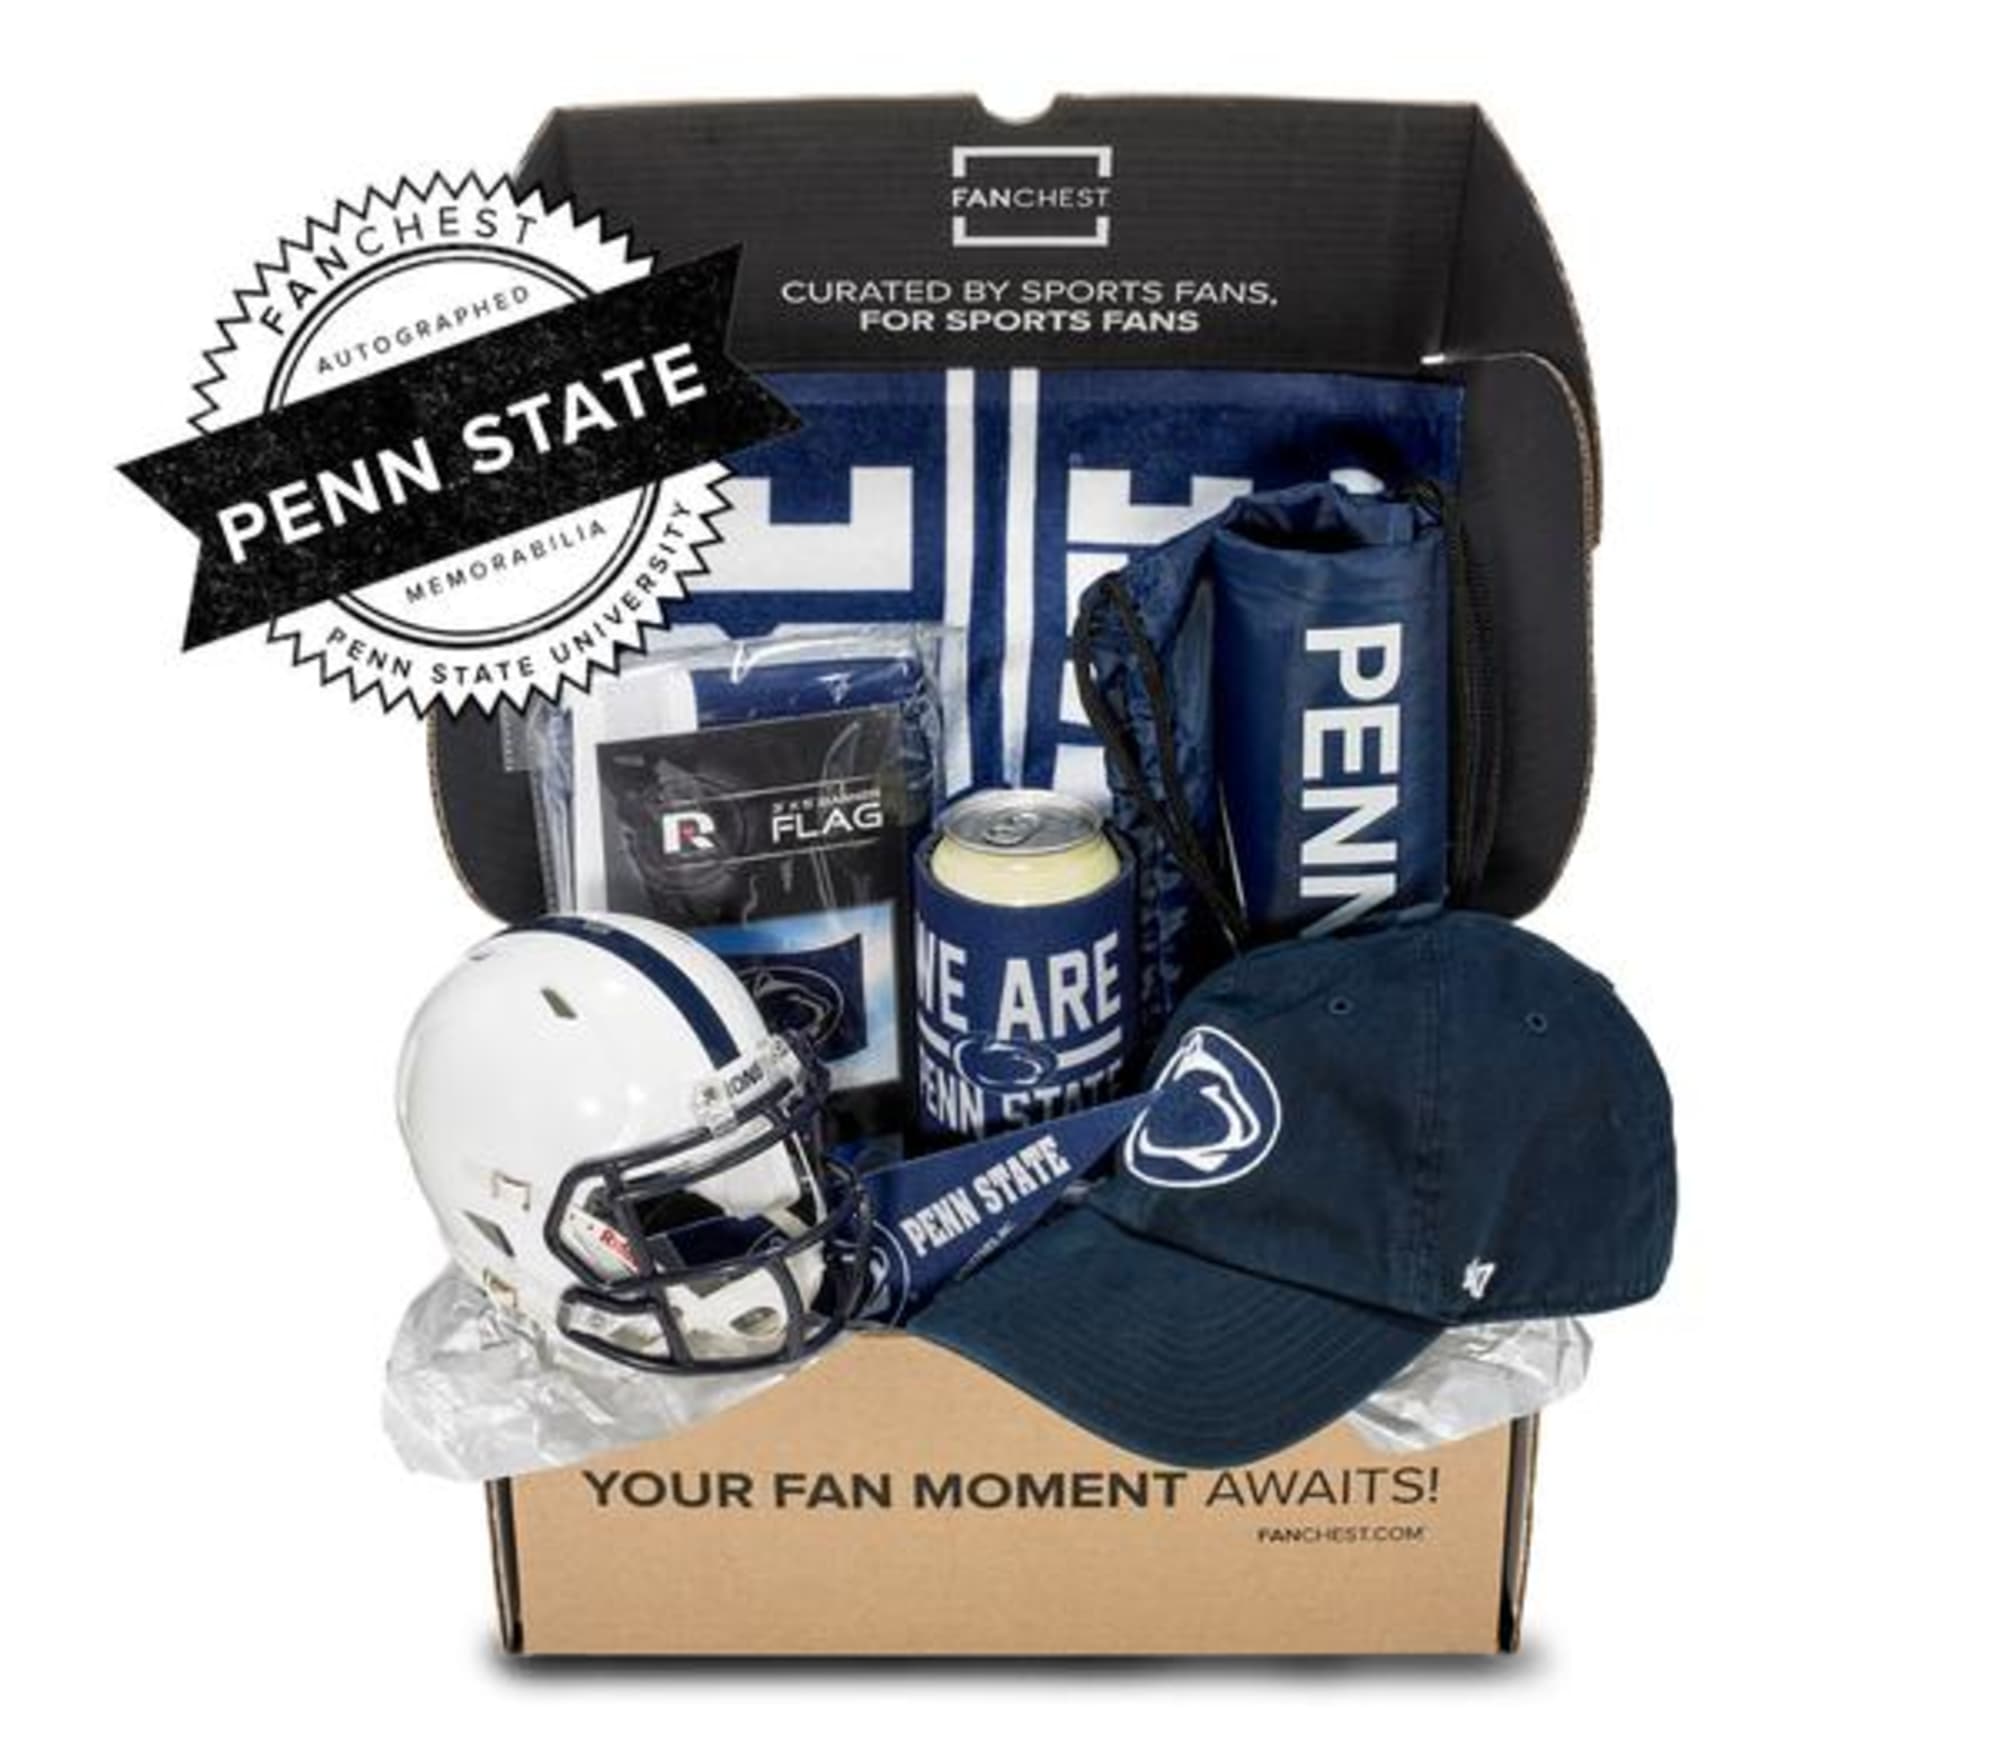 A Penn State Nittany Lions Fanchest is the perfect holiday